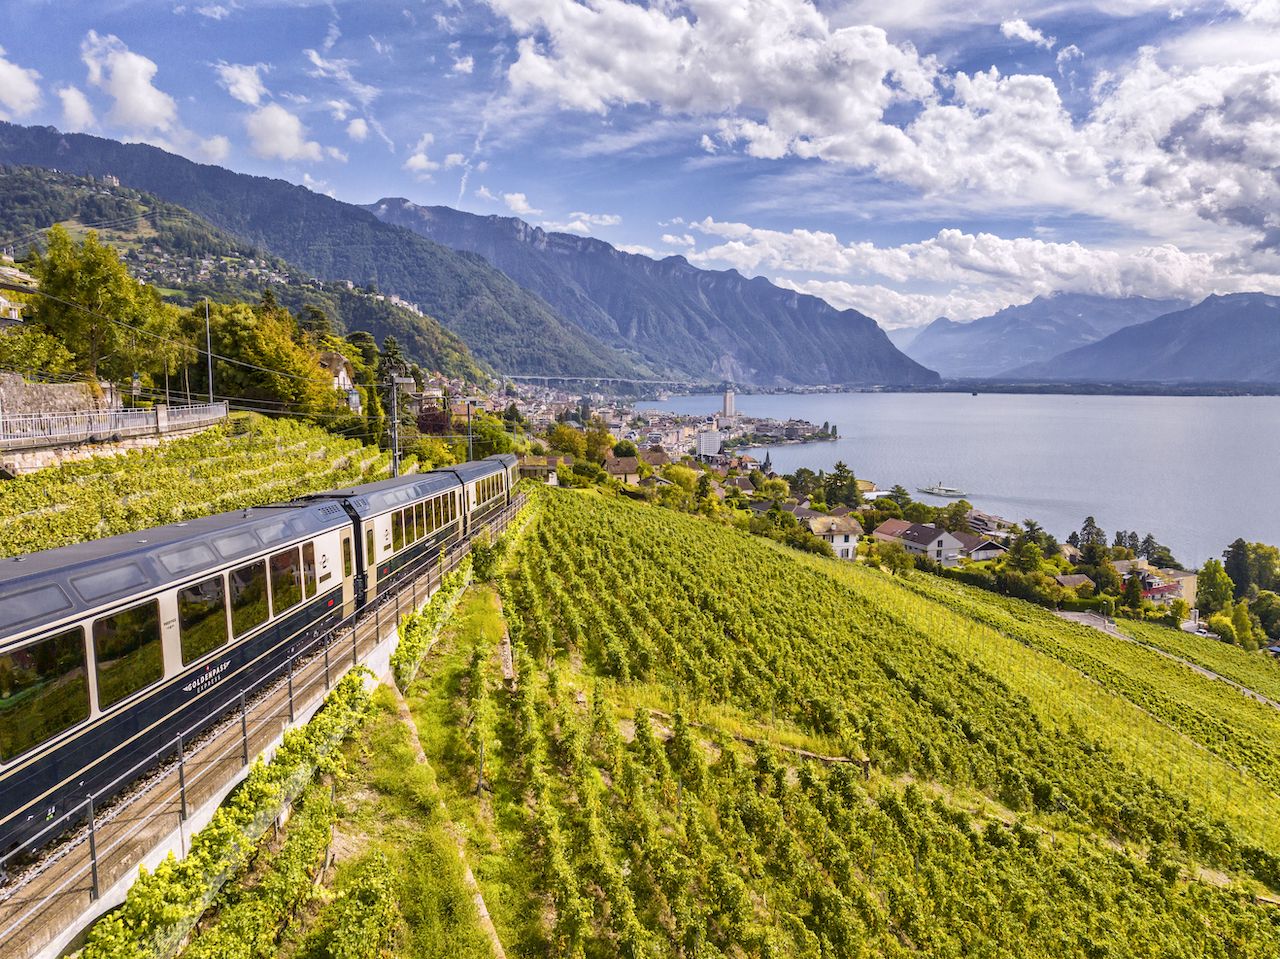 The canton of Vaud in Switzerland is set to launch the highly anticipated 115.34km GoldenPass Express Line next month, linking Montreux and Interlaken.  